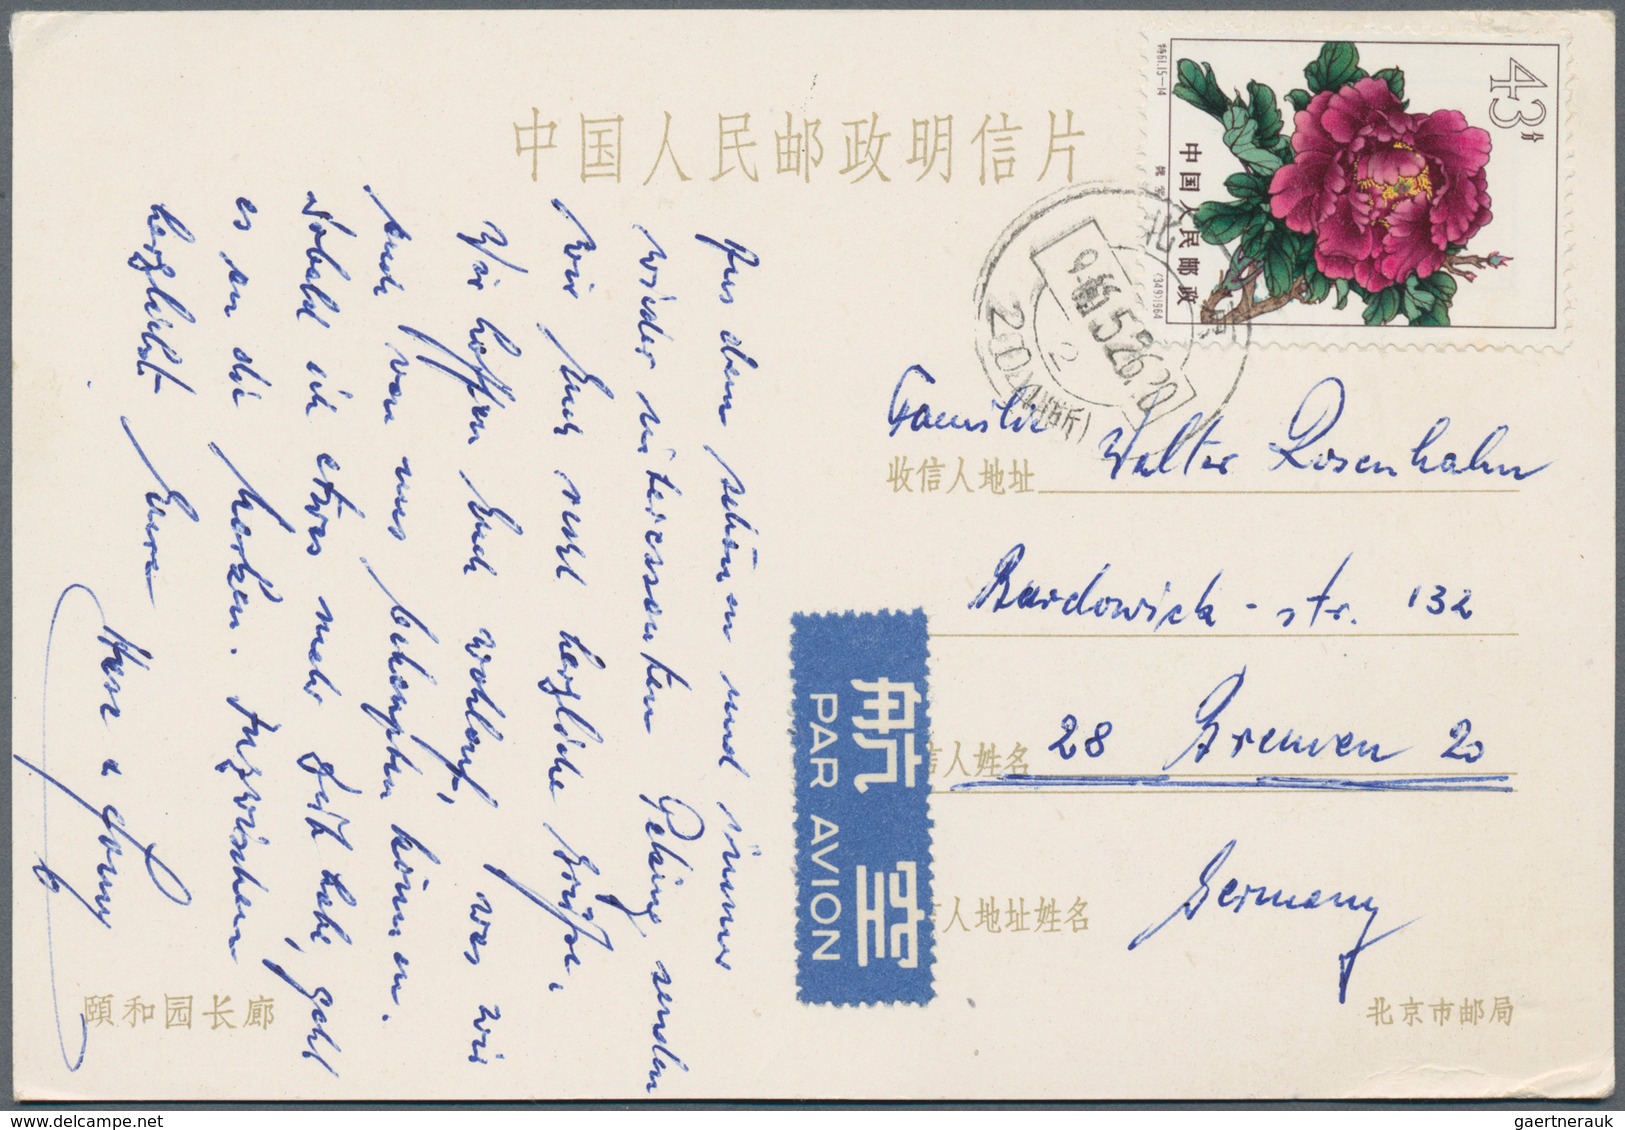 China - Volksrepublik - Ganzsachen: 1960s/70s, 8f. Single Franks On Cover (29) Or Ppc (2) Inc. Some - Cartes Postales